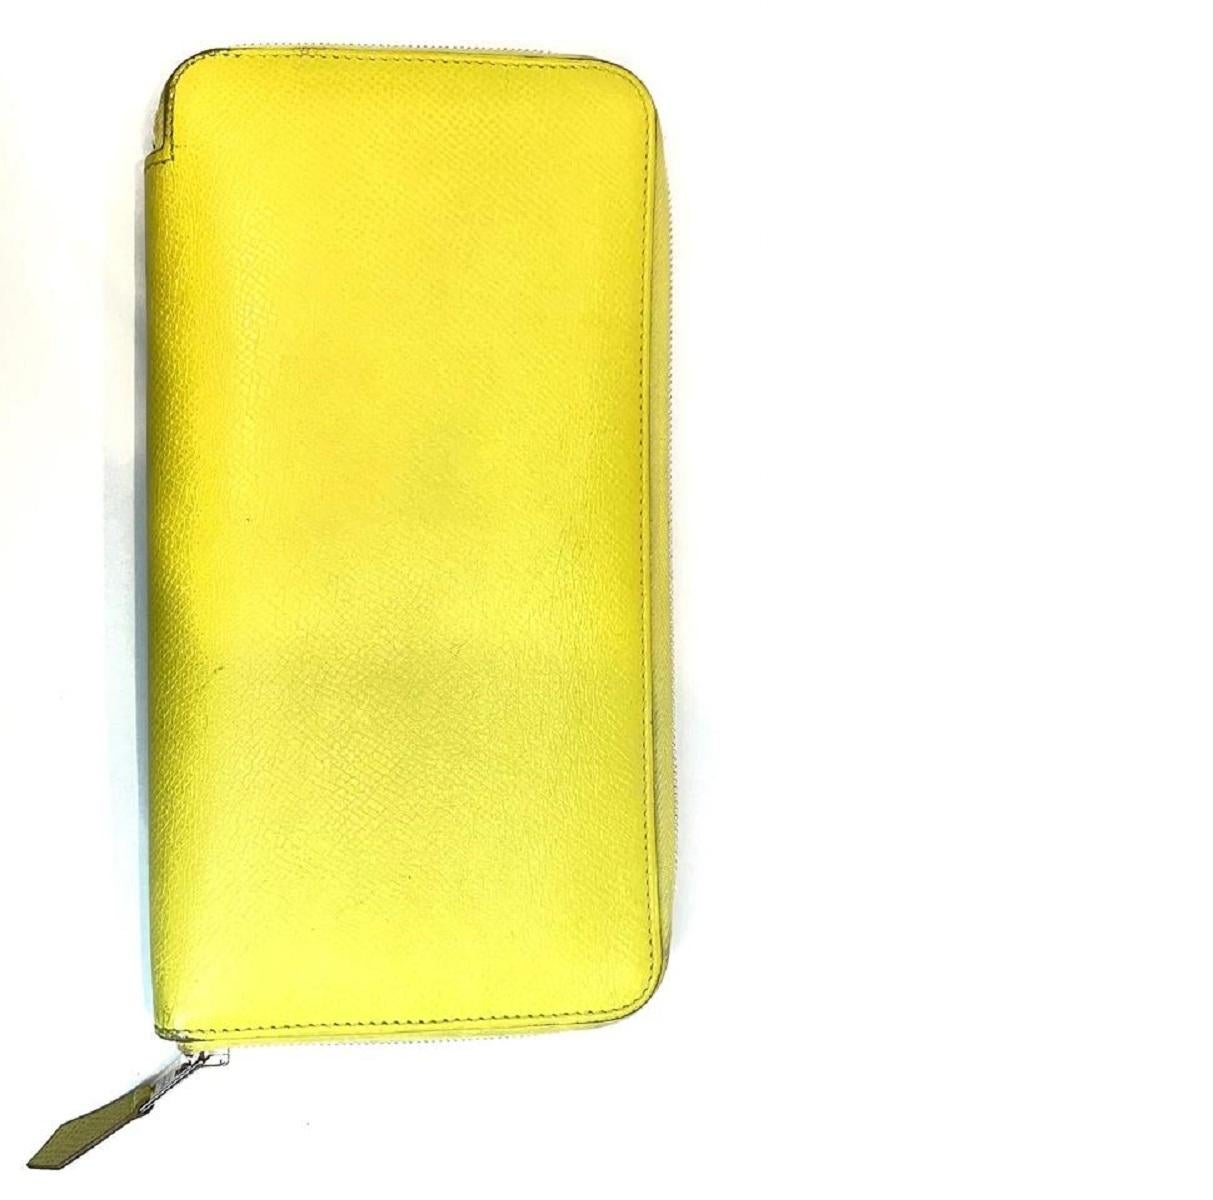 Hermès Yellow Epsom Leather Silk'In Classique Long wallet 2h520 For Sale 1